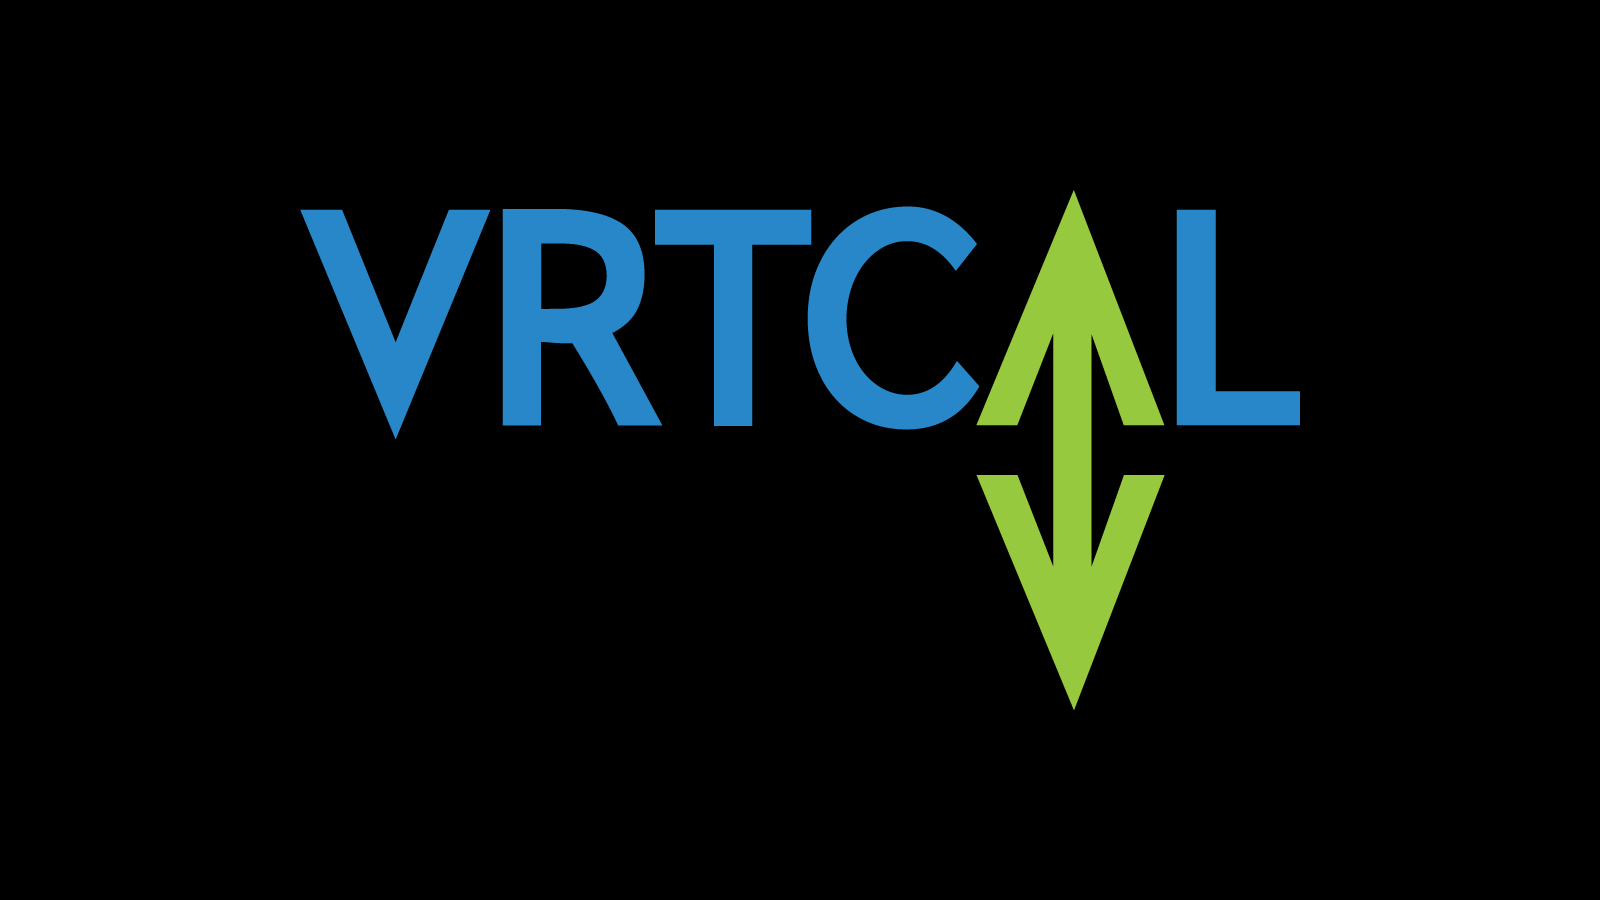 Mobile SSP VRTCAL launches a $5 million bonus fund to attract new app developers